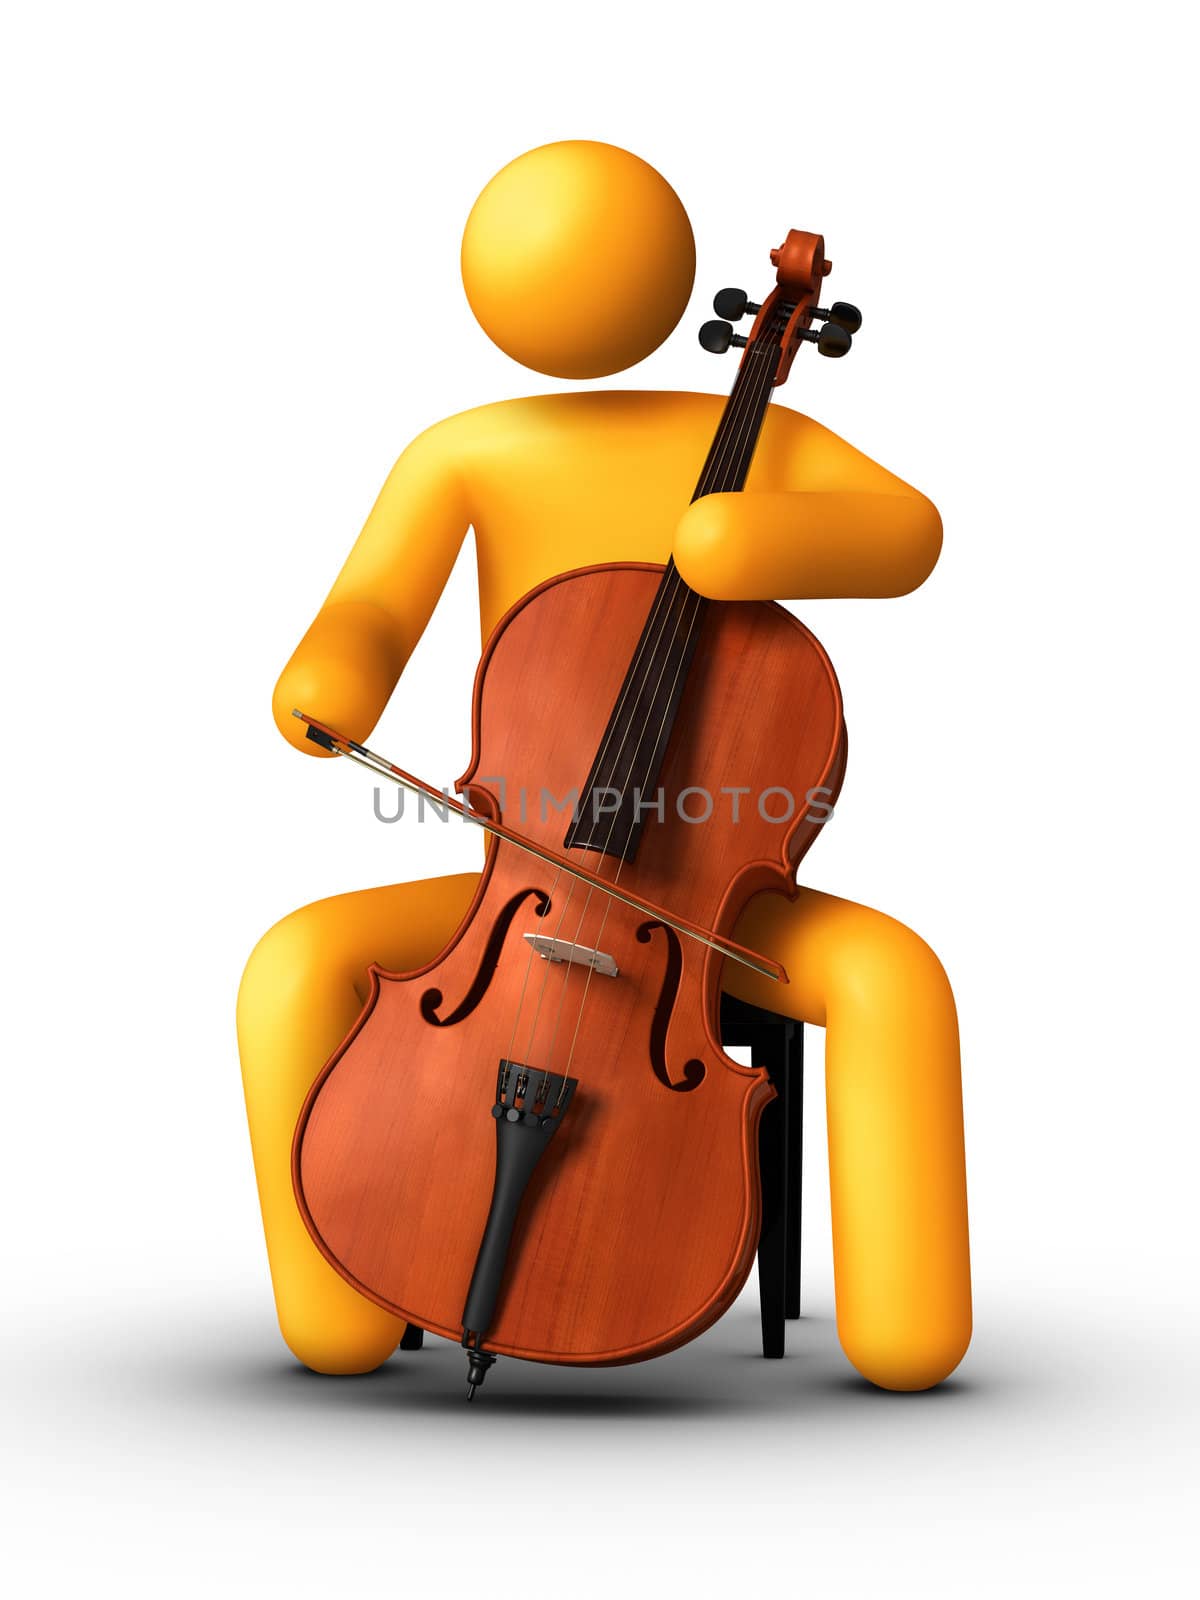 Playing Cello by ayzek